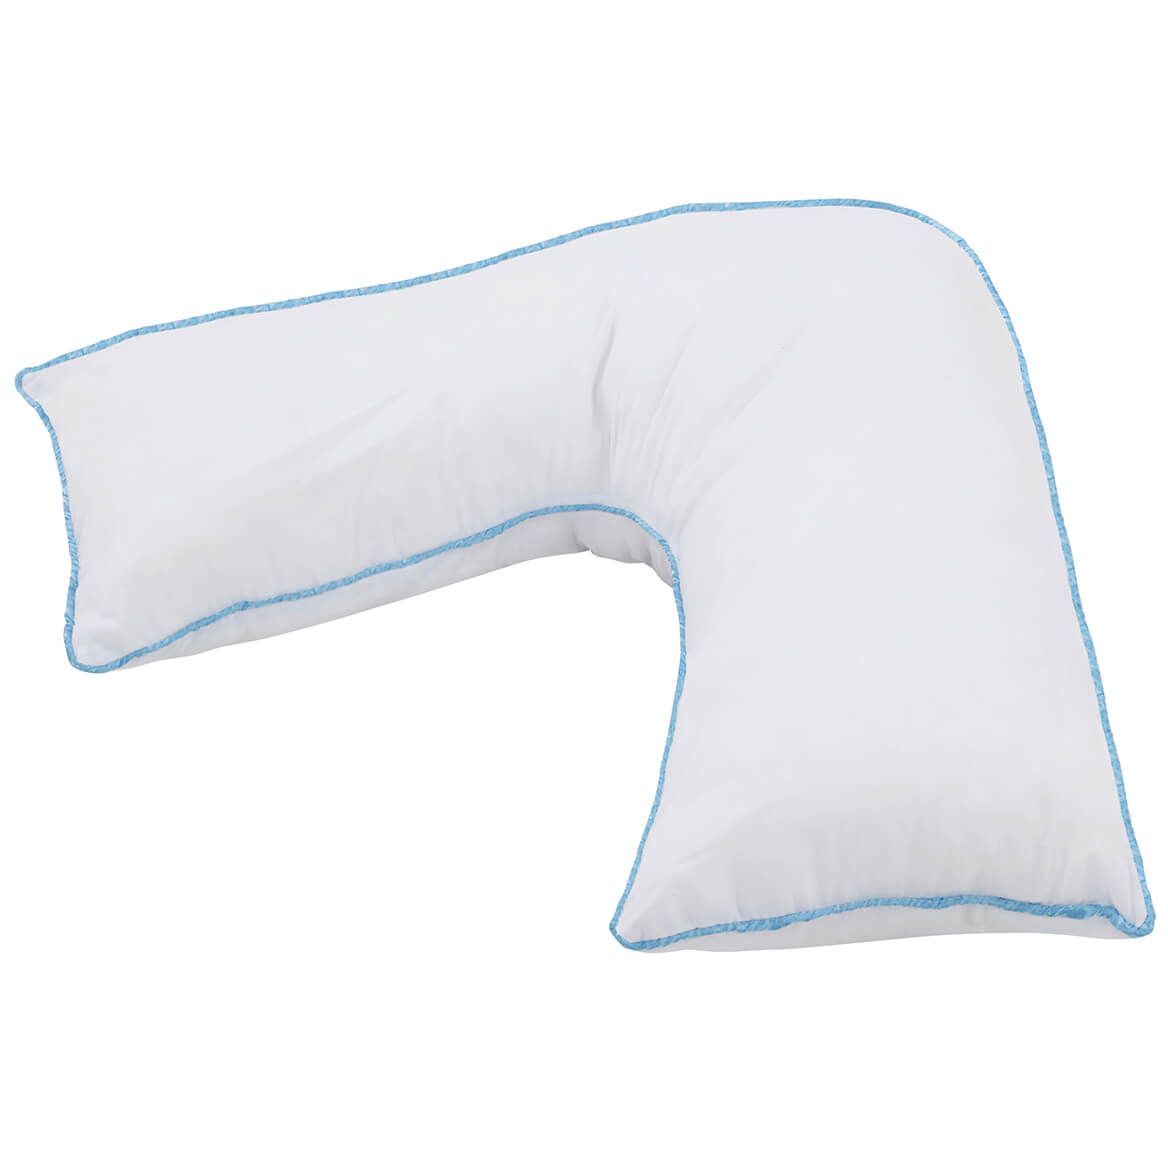 L-Shaped Pillow Cover + '-' + 353956